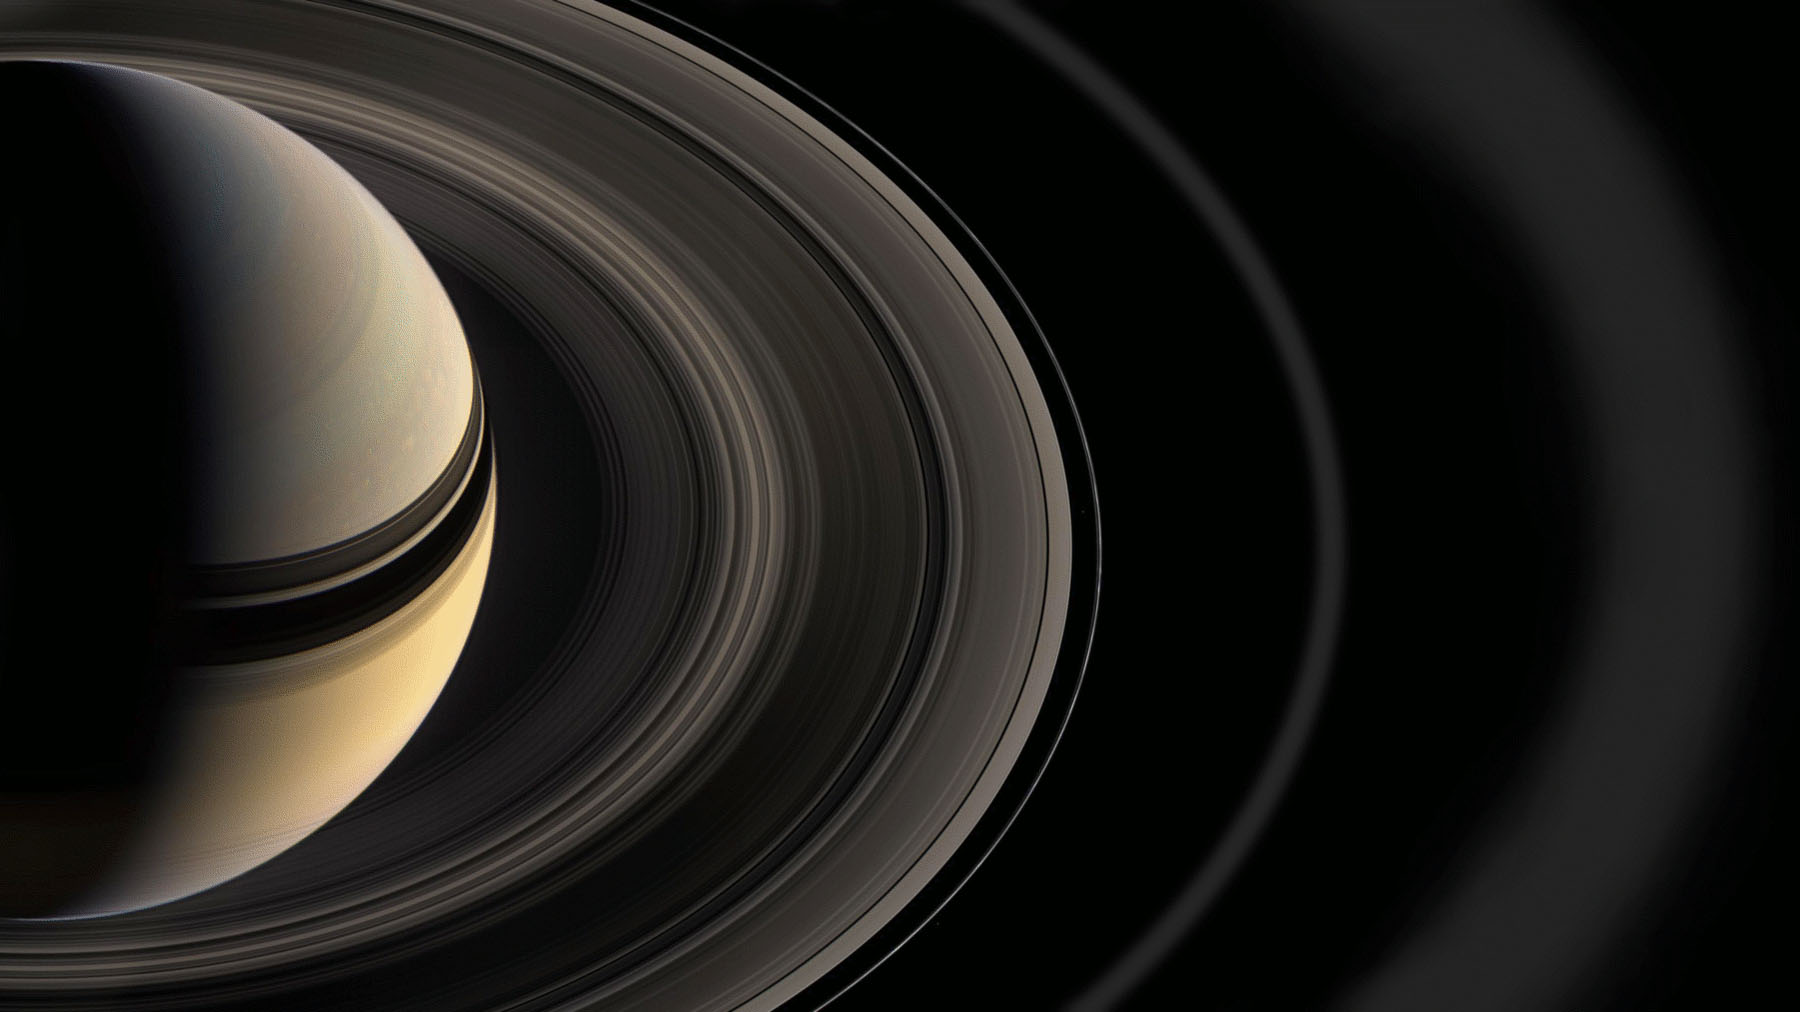 Saturn rings around the earth and in the background...